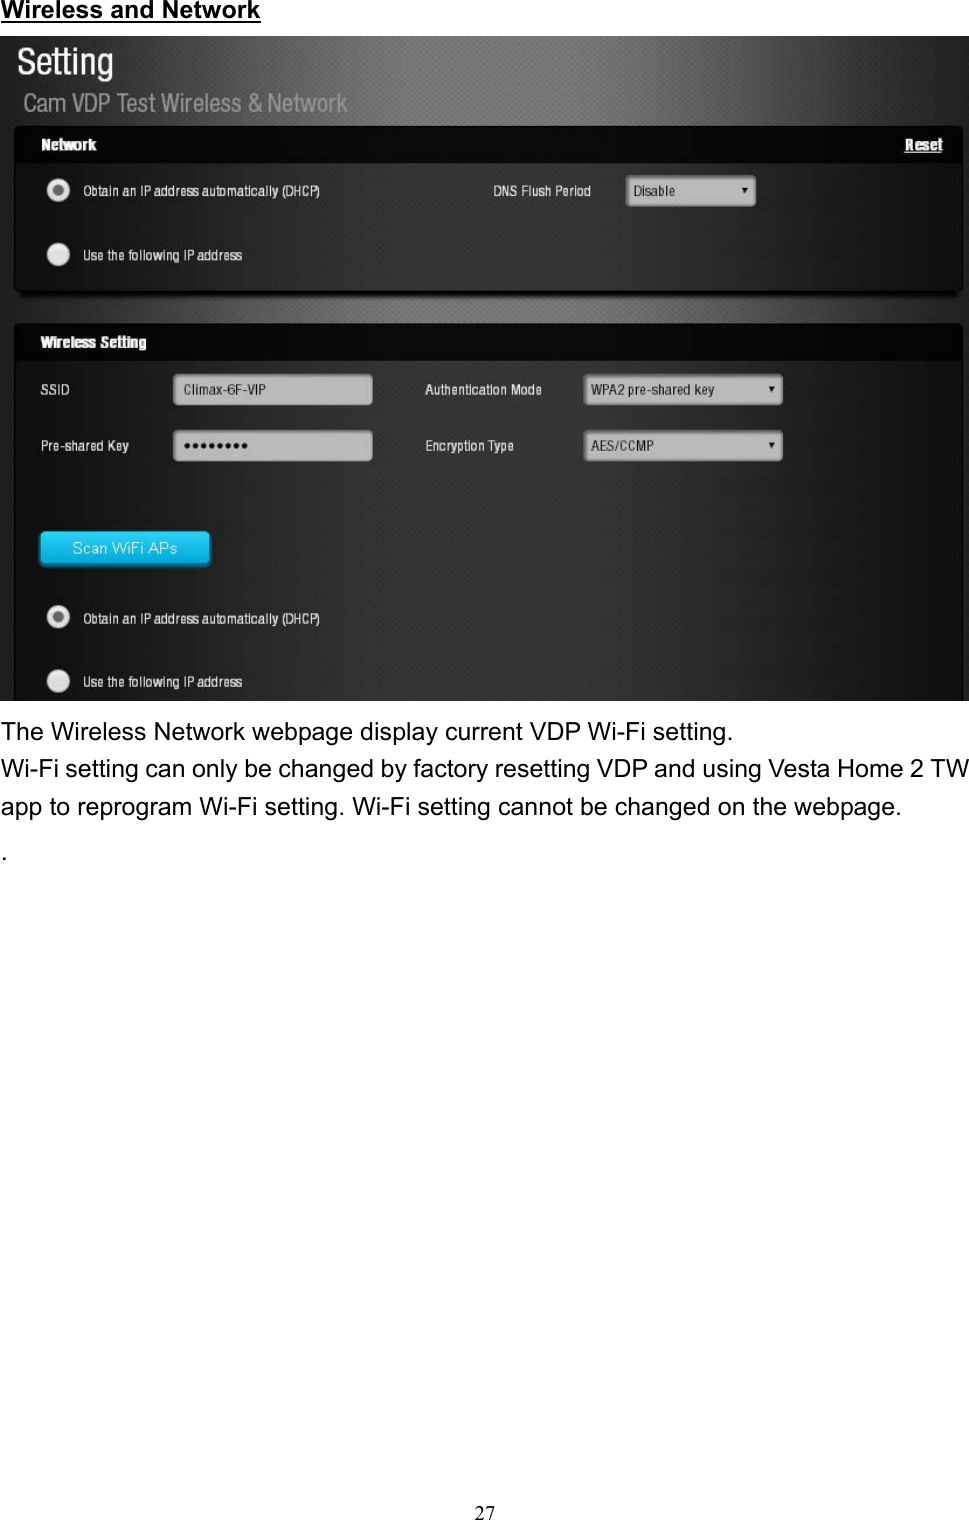 27  Wireless and Network  The Wireless Network webpage display current VDP Wi-Fi setting.  Wi-Fi setting can only be changed by factory resetting VDP and using Vesta Home 2 TW app to reprogram Wi-Fi setting. Wi-Fi setting cannot be changed on the webpage. .               